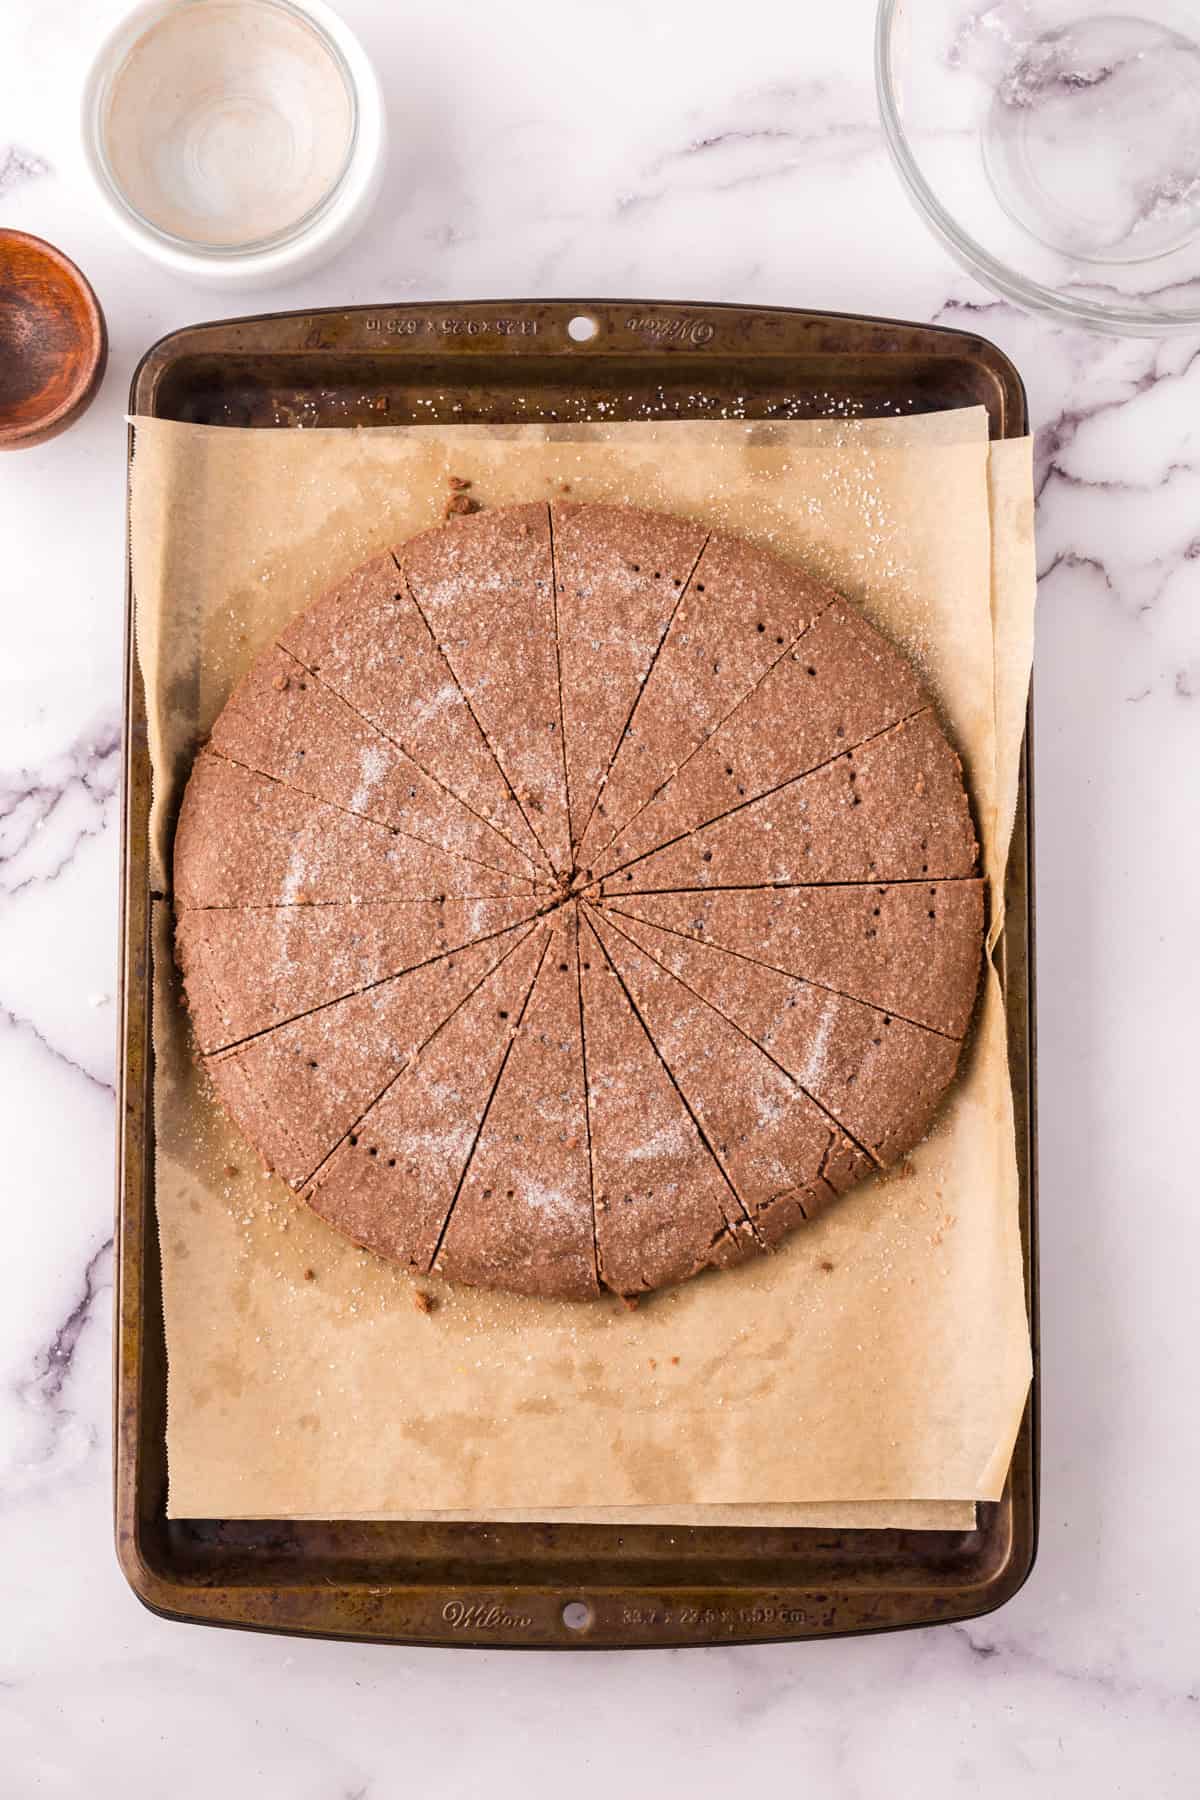 baking sheet with parchment and a delicious baked round chocolate shortbread.